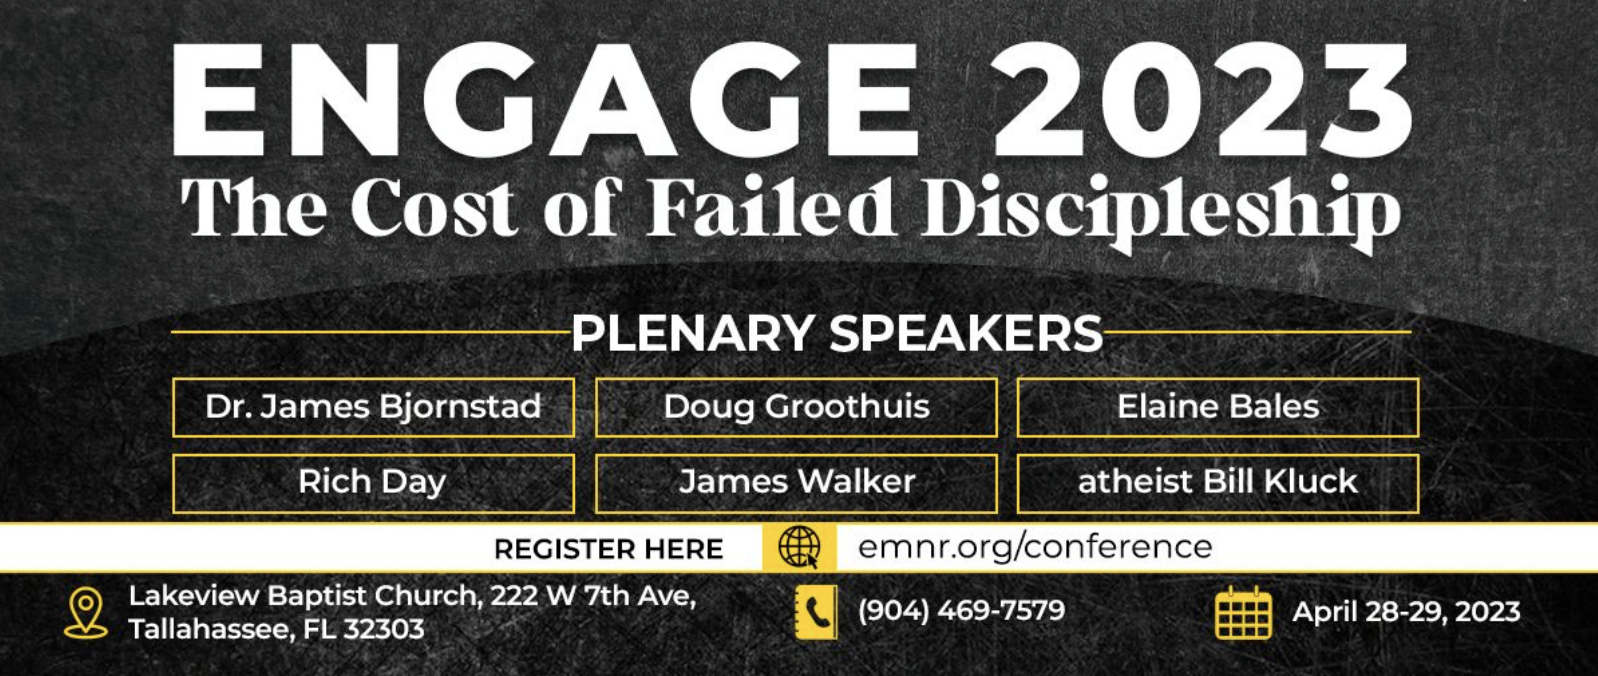 Engage 2023: The Cost of Failed Discipleship